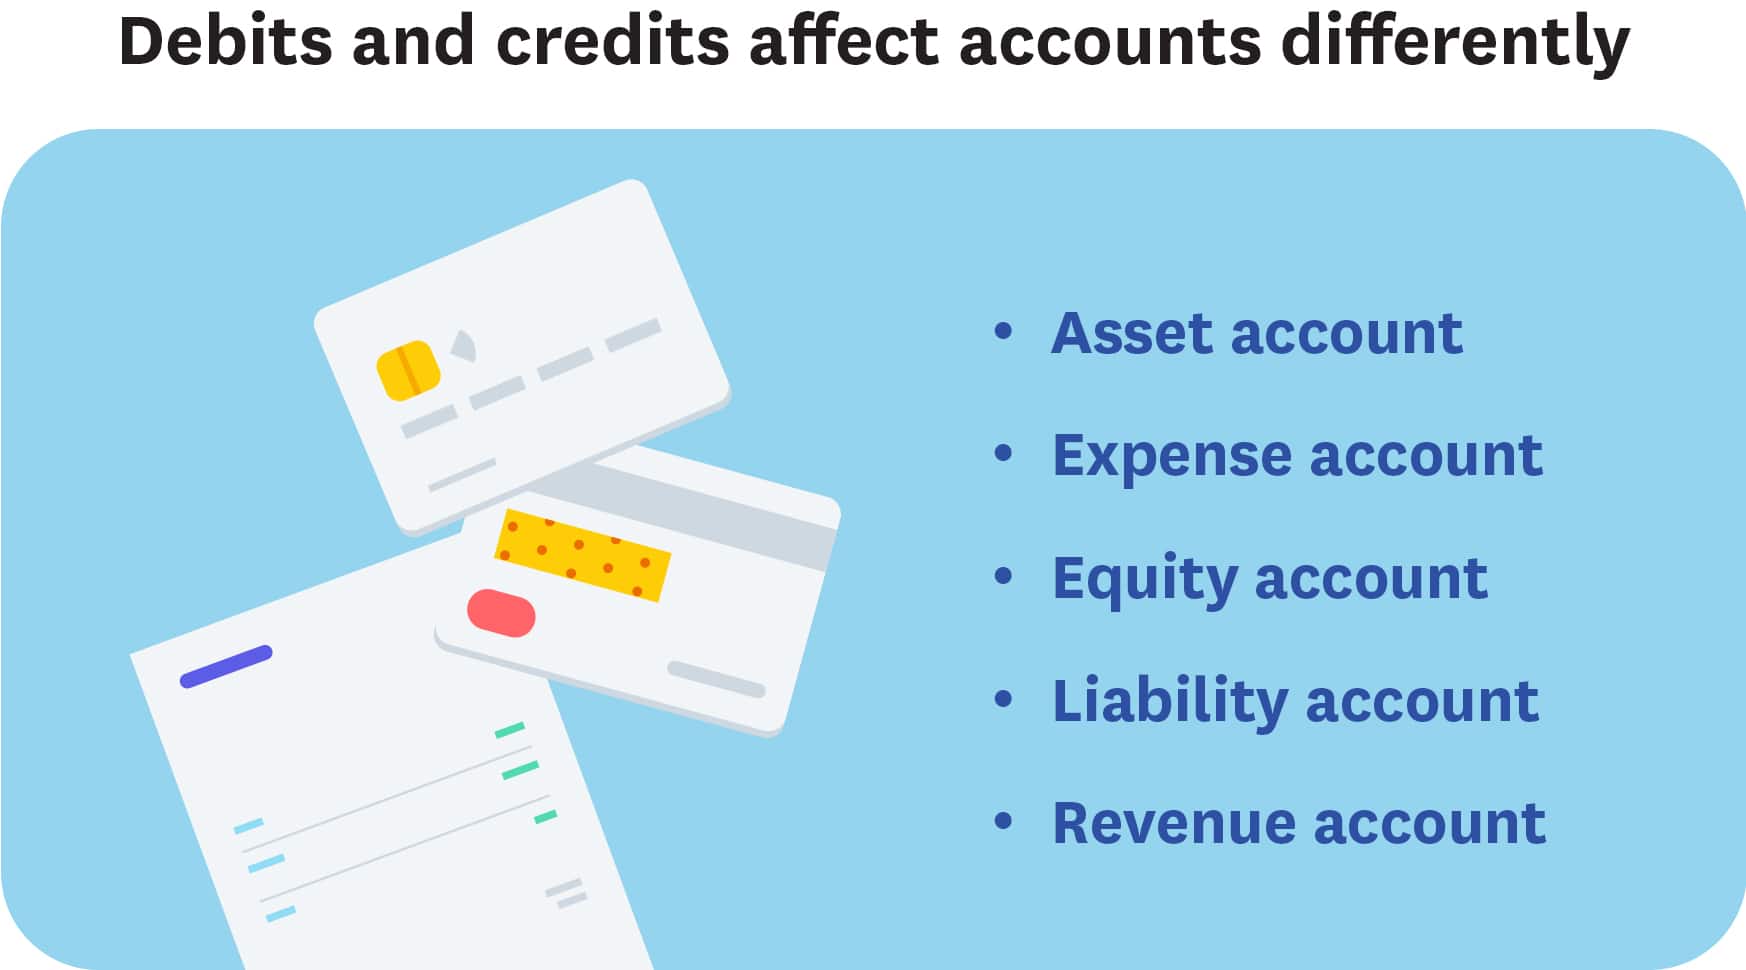 Debits and credits affect accounts differently depending on the type of account–asset, expense, equity, liability or revenue.